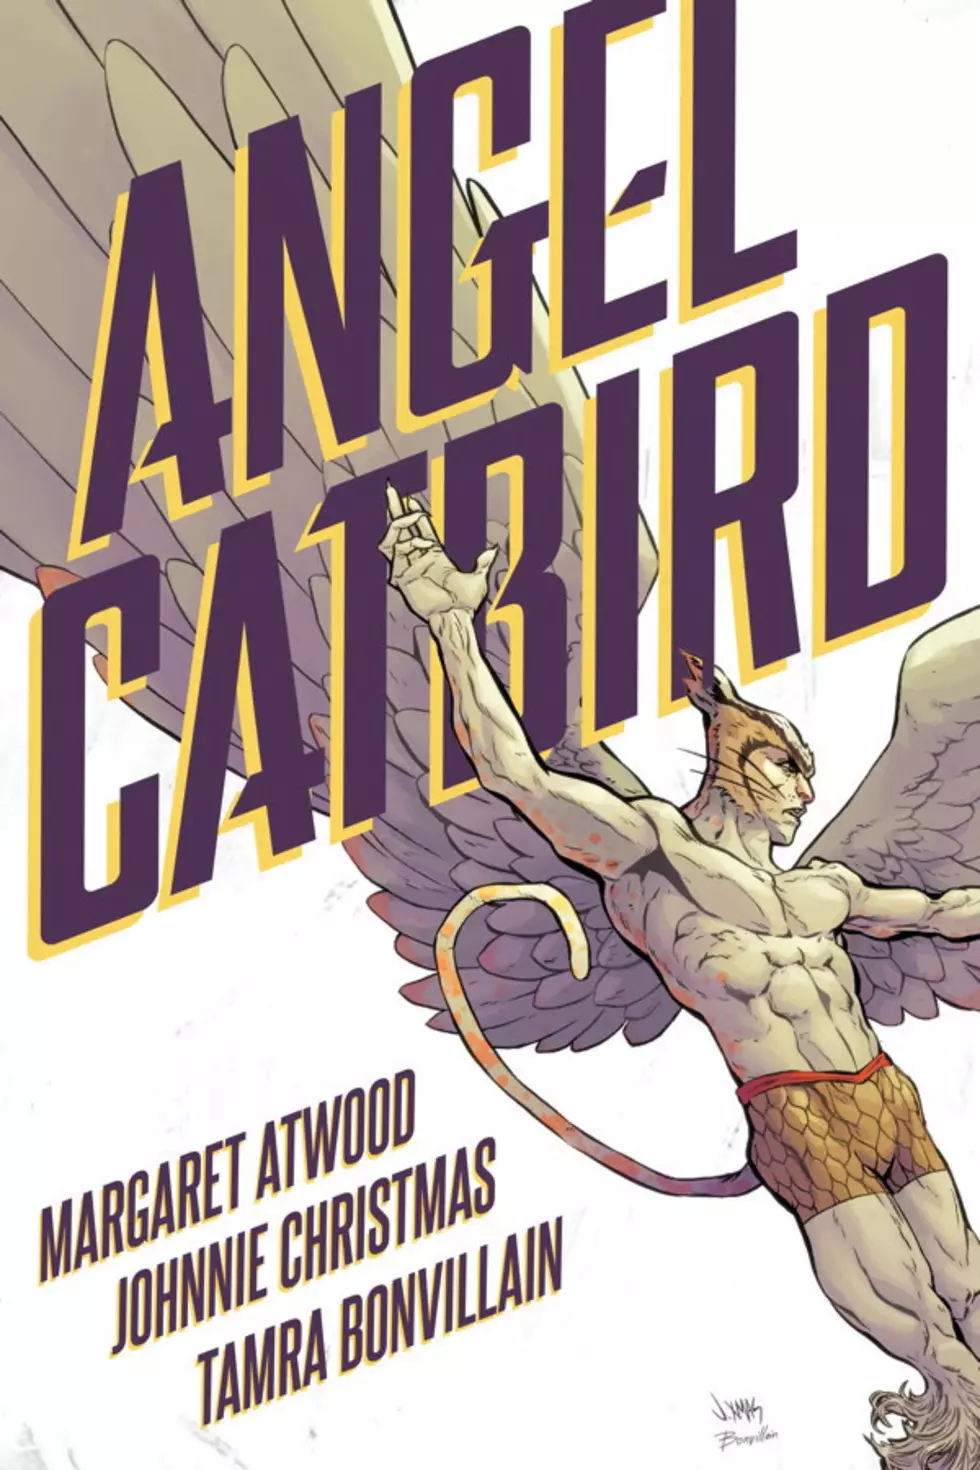 &#8216;Angel Catbird&#8217; Is Going To Have A Cat Dracula Named Catula, So Remember That When We&#8217;re Giving Out Awards [Preview]